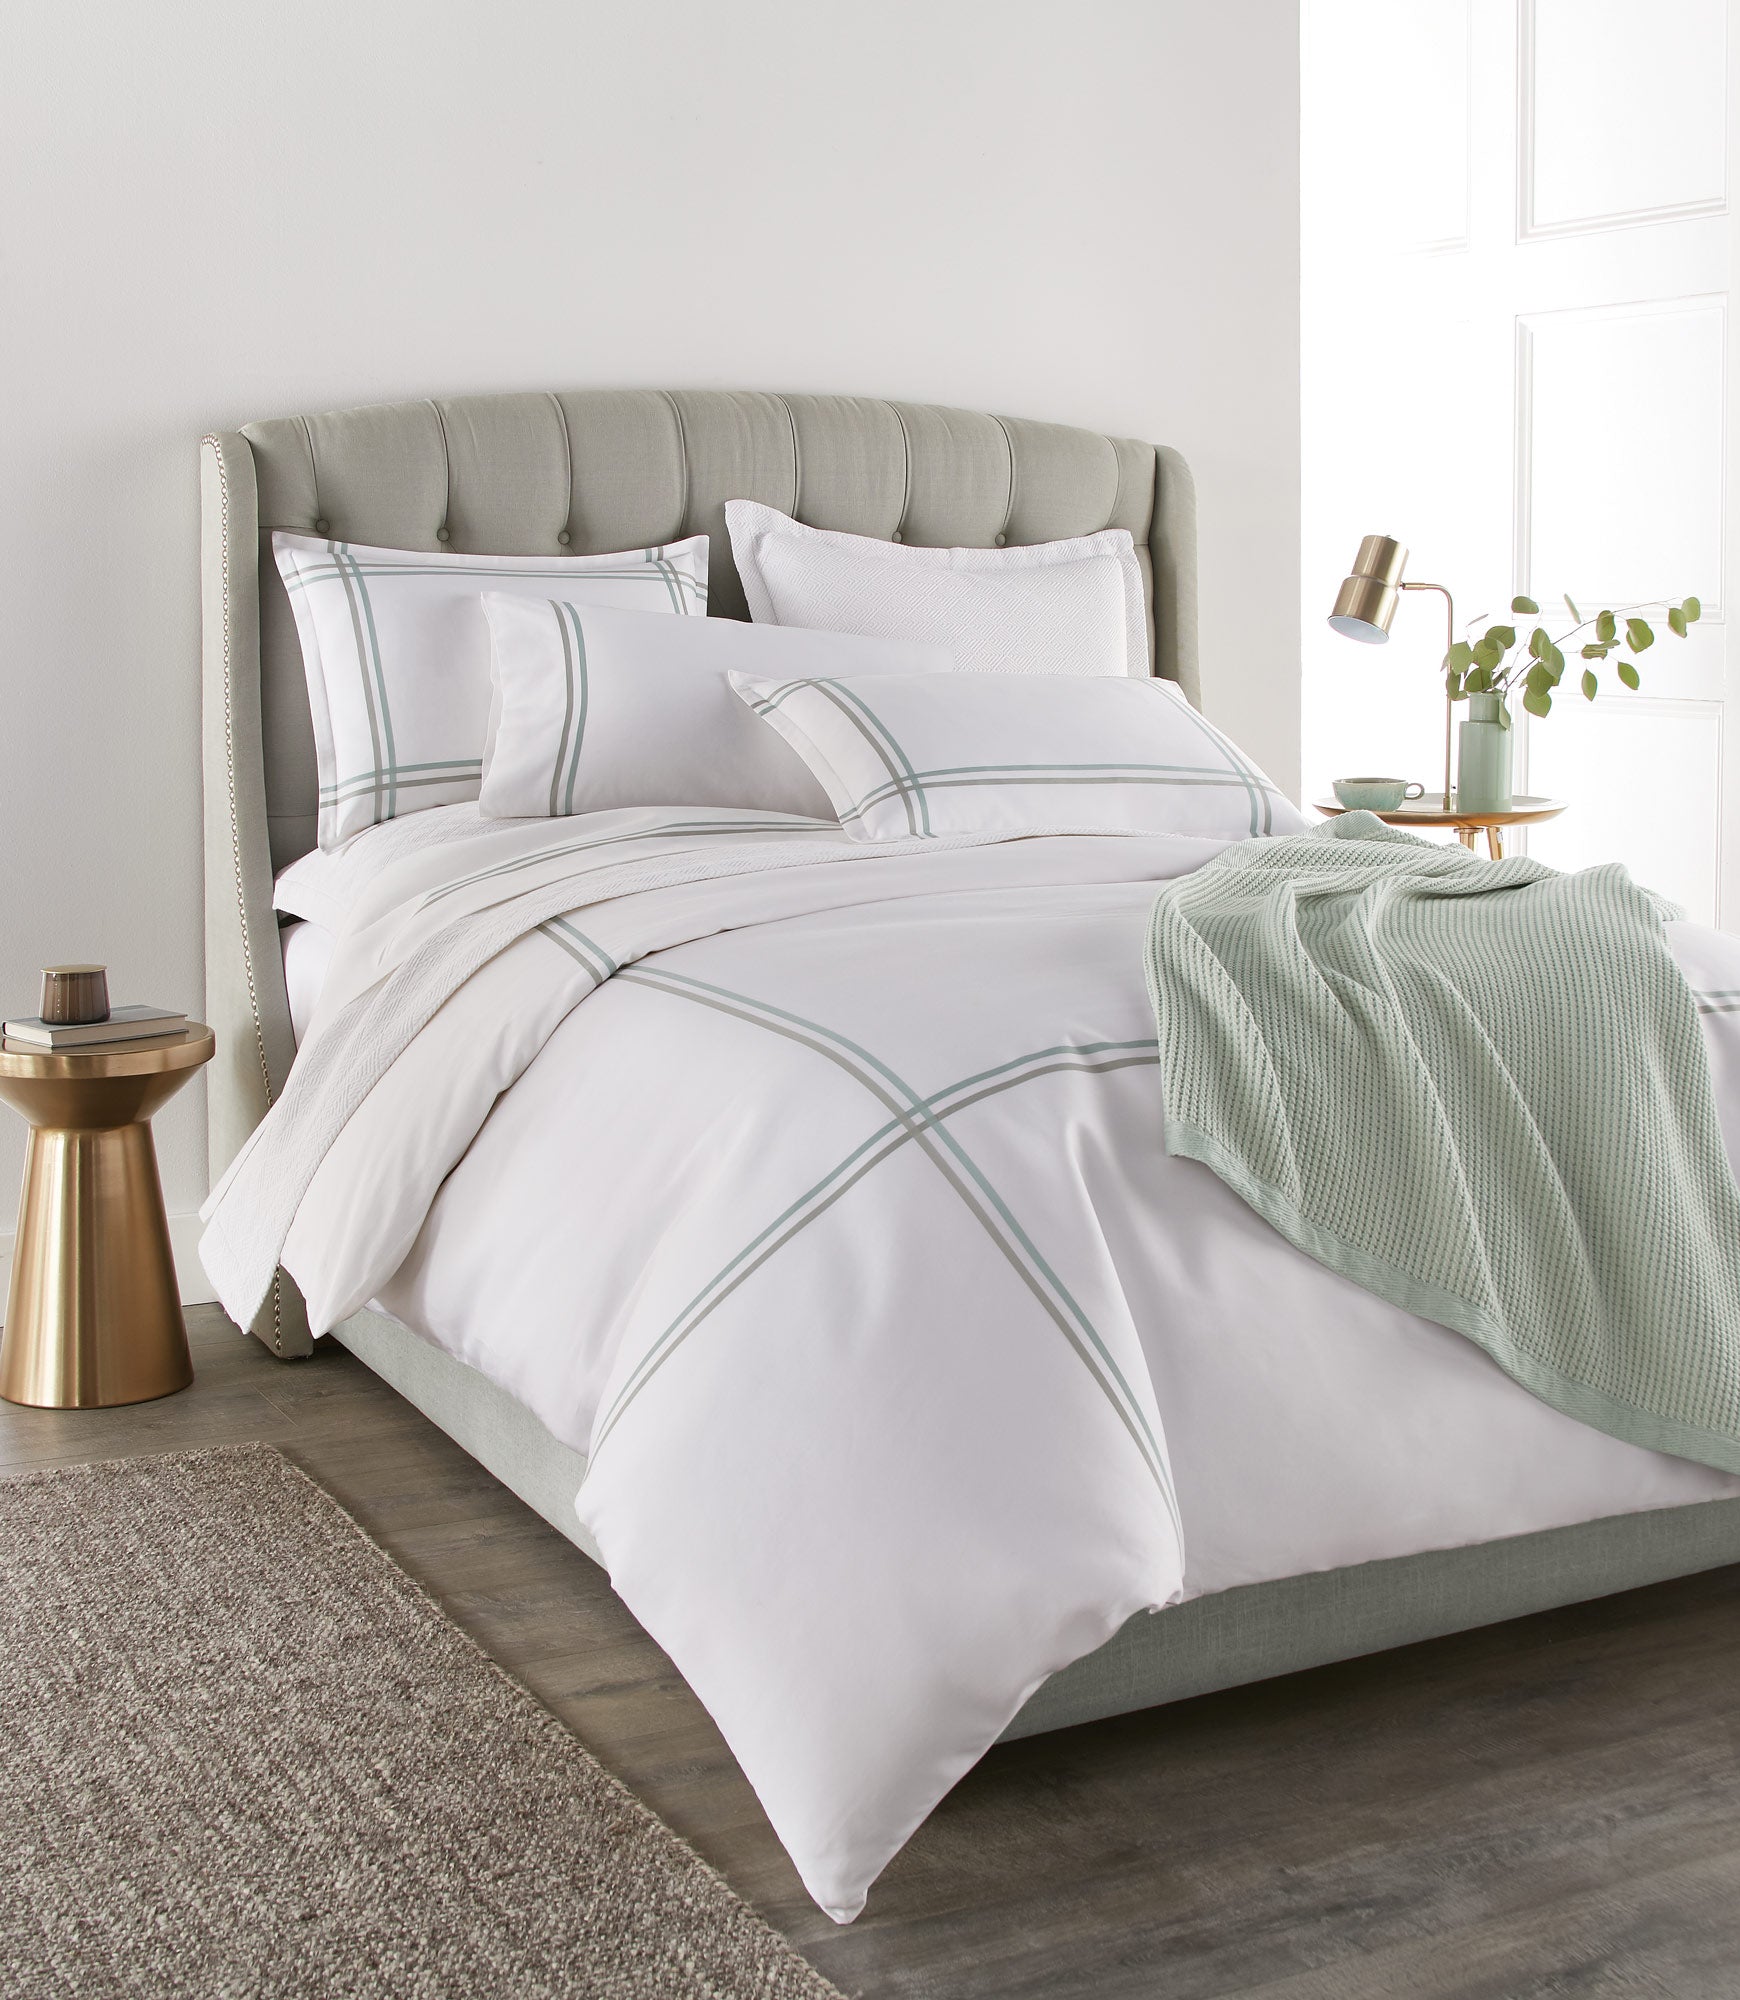 Duo Duvet and Shams Sage on Bed